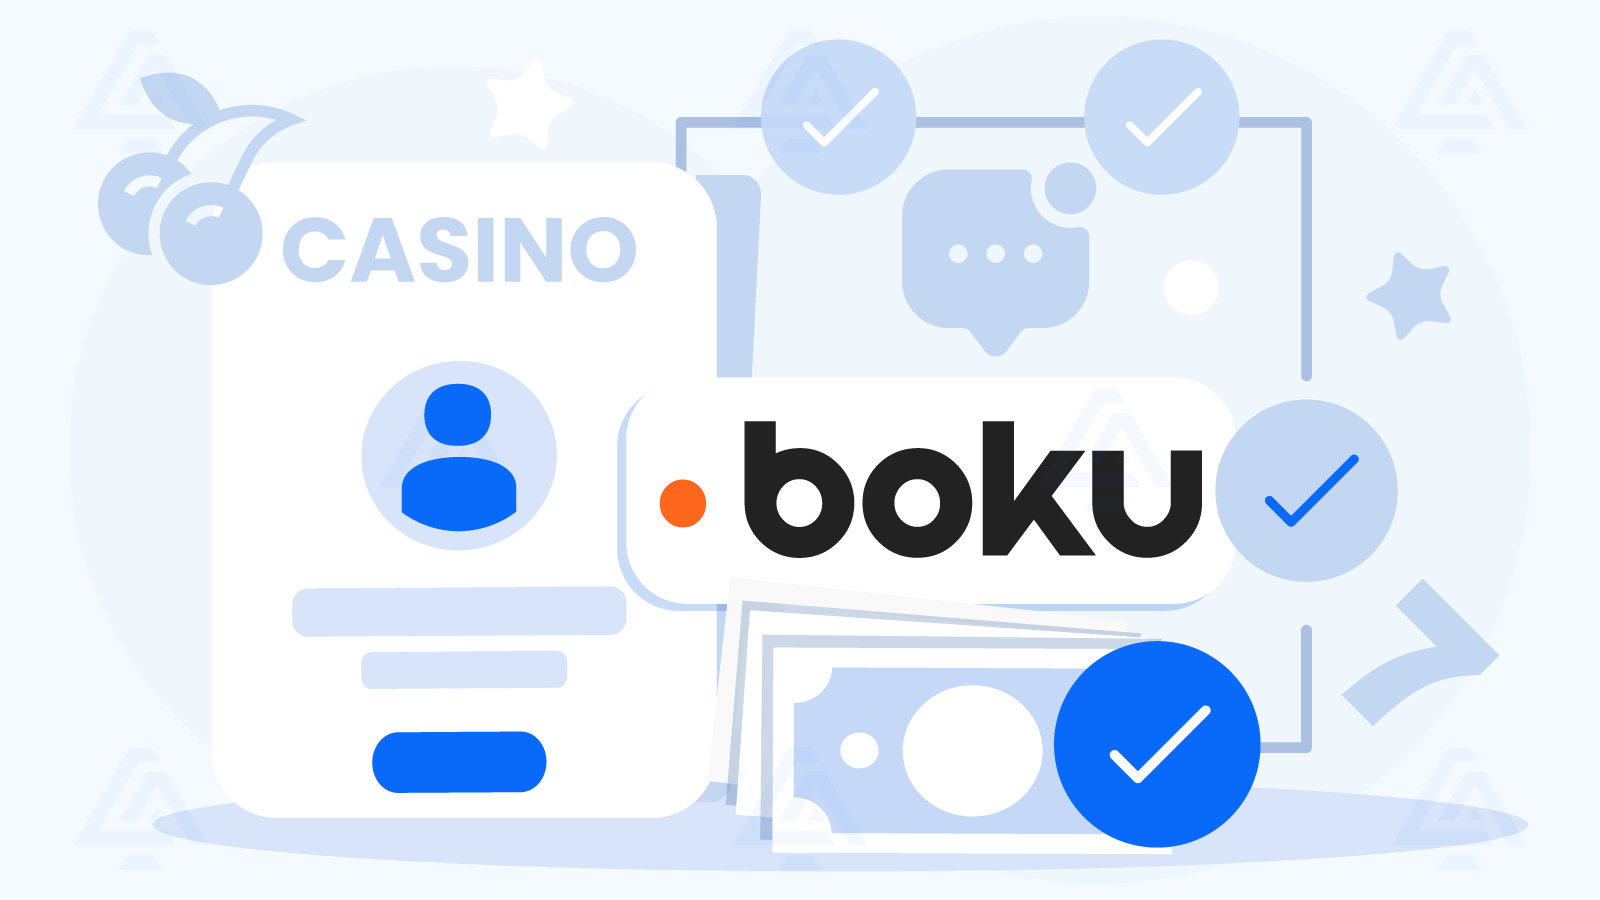 How to Make a Boku Deposit in a UK Casino